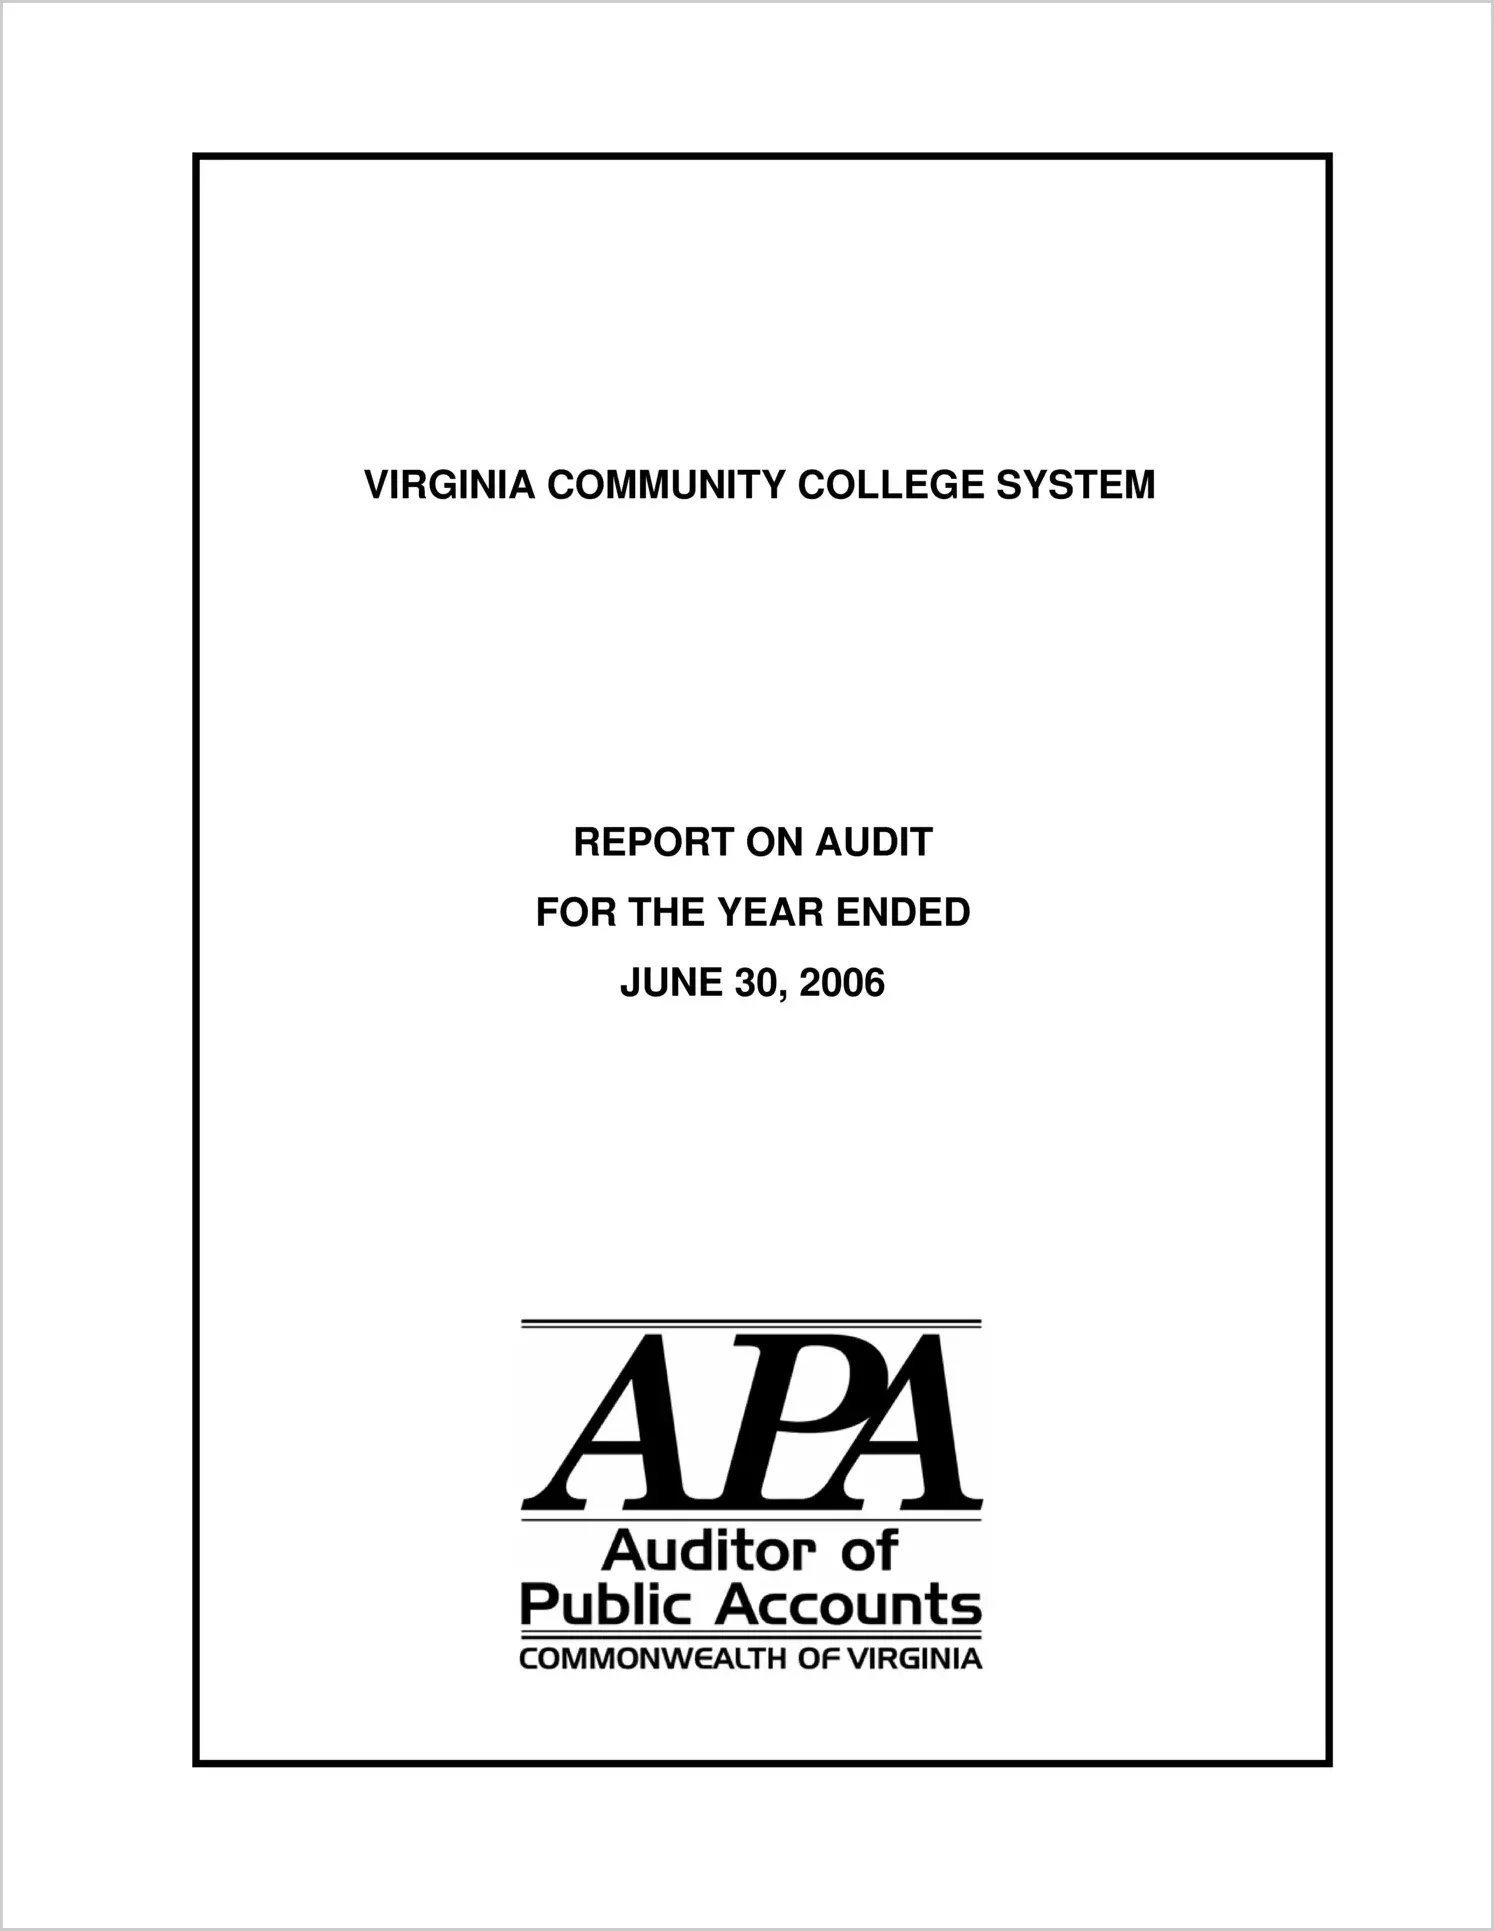 Virginia Community College System for the year ended June 30, 2006